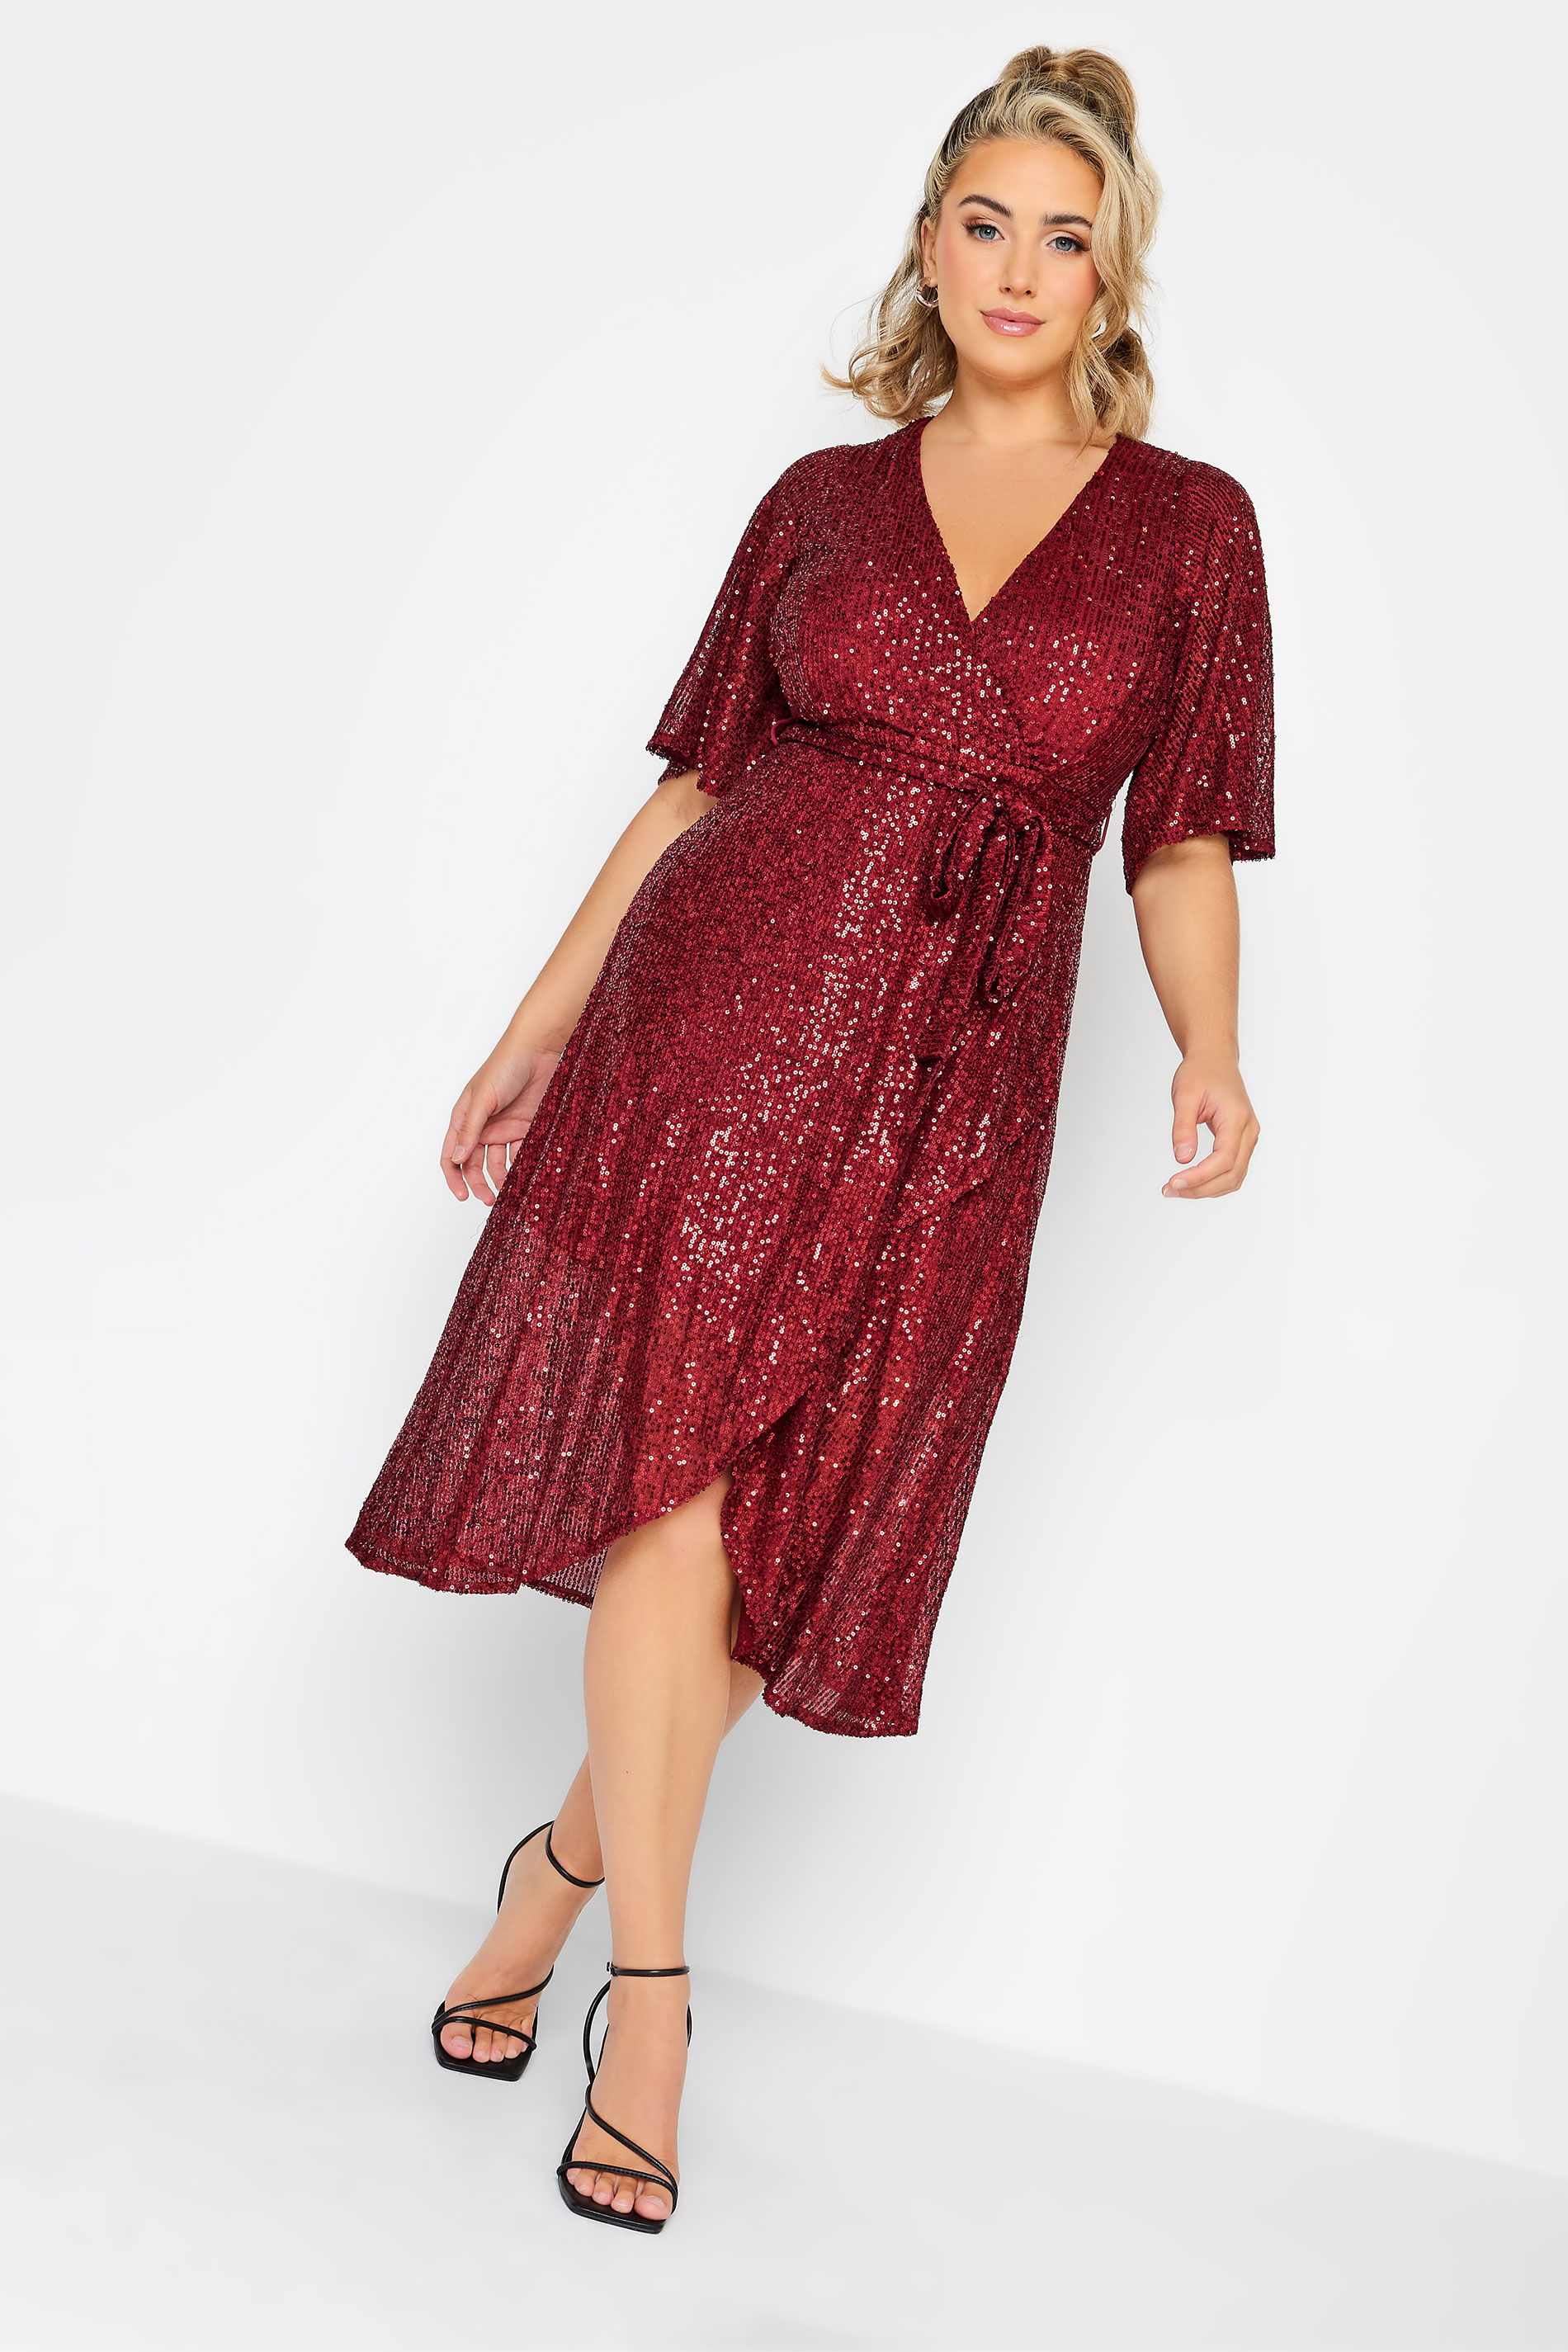 YOURS LONDON Plus Size Red Sequin Embellished Double Wrap Dress | Yours Clothing 1